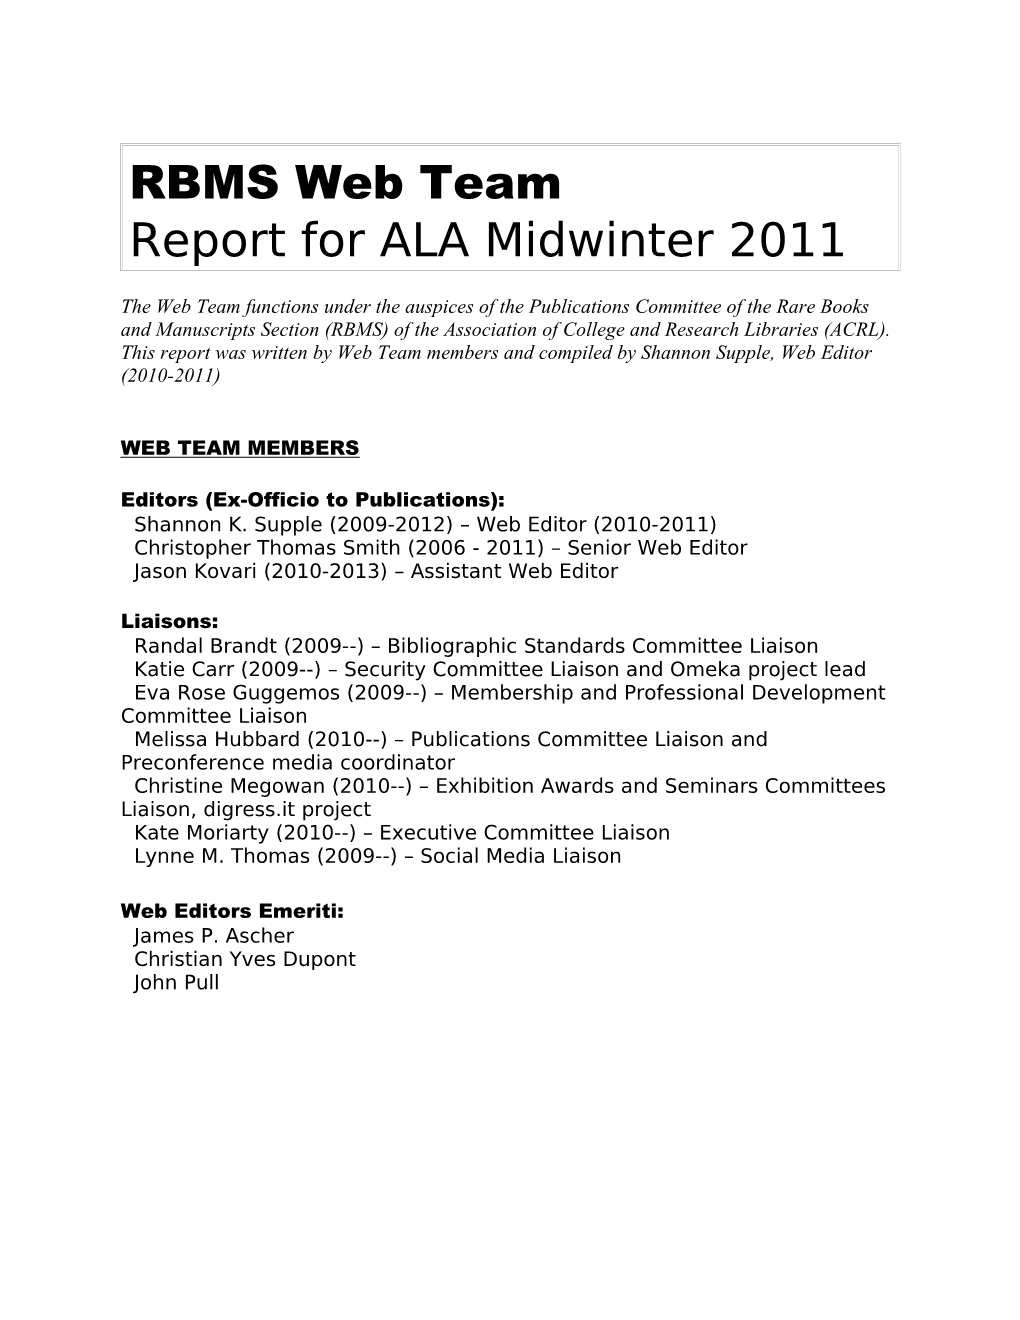 RBMS Web Team Report for Annual 2010